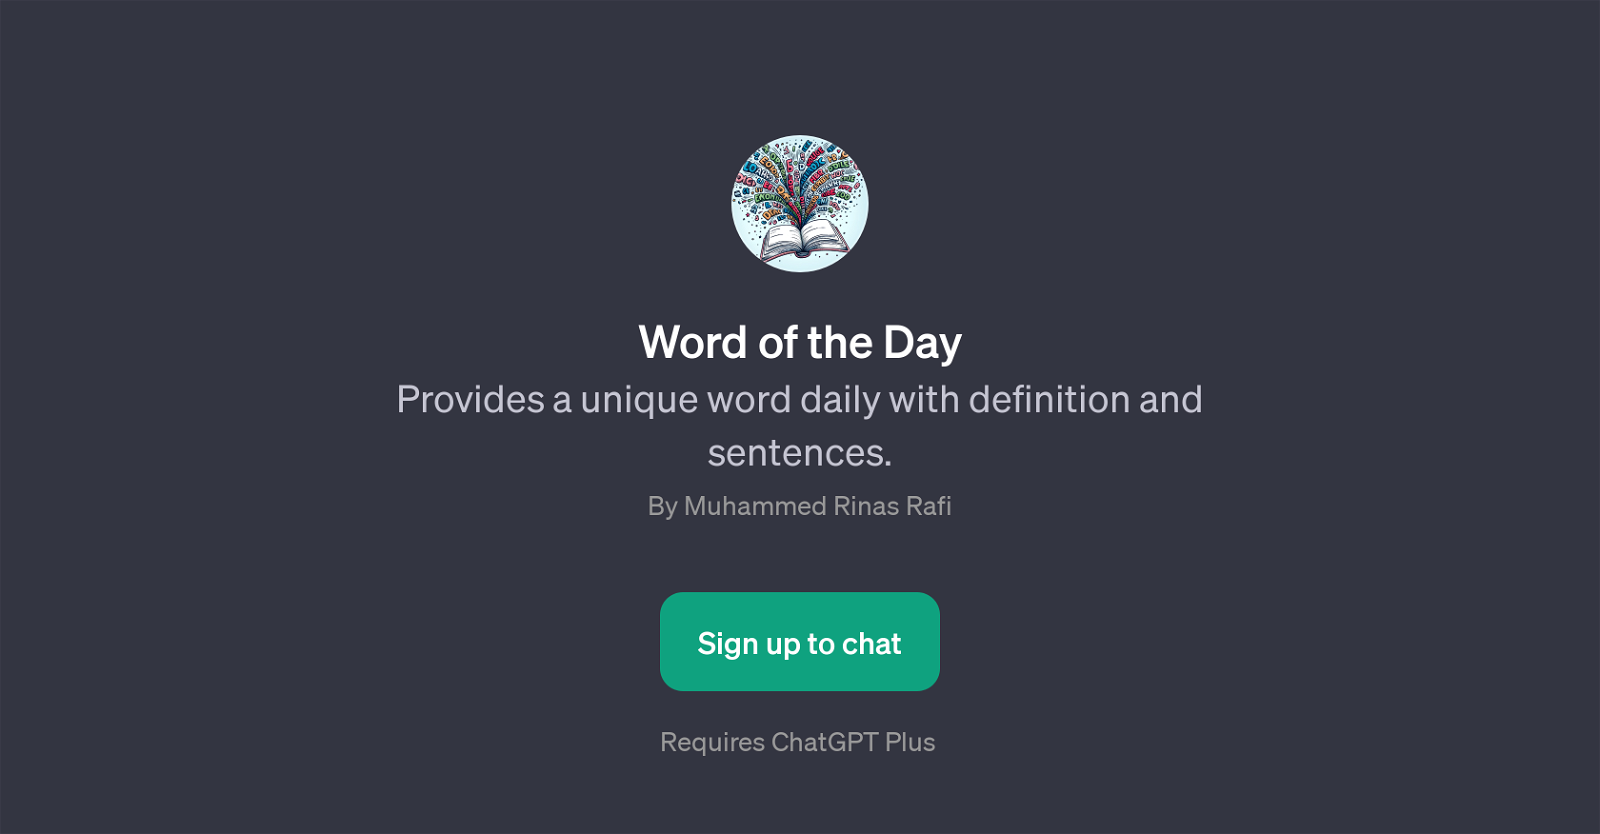 Word of the Day website